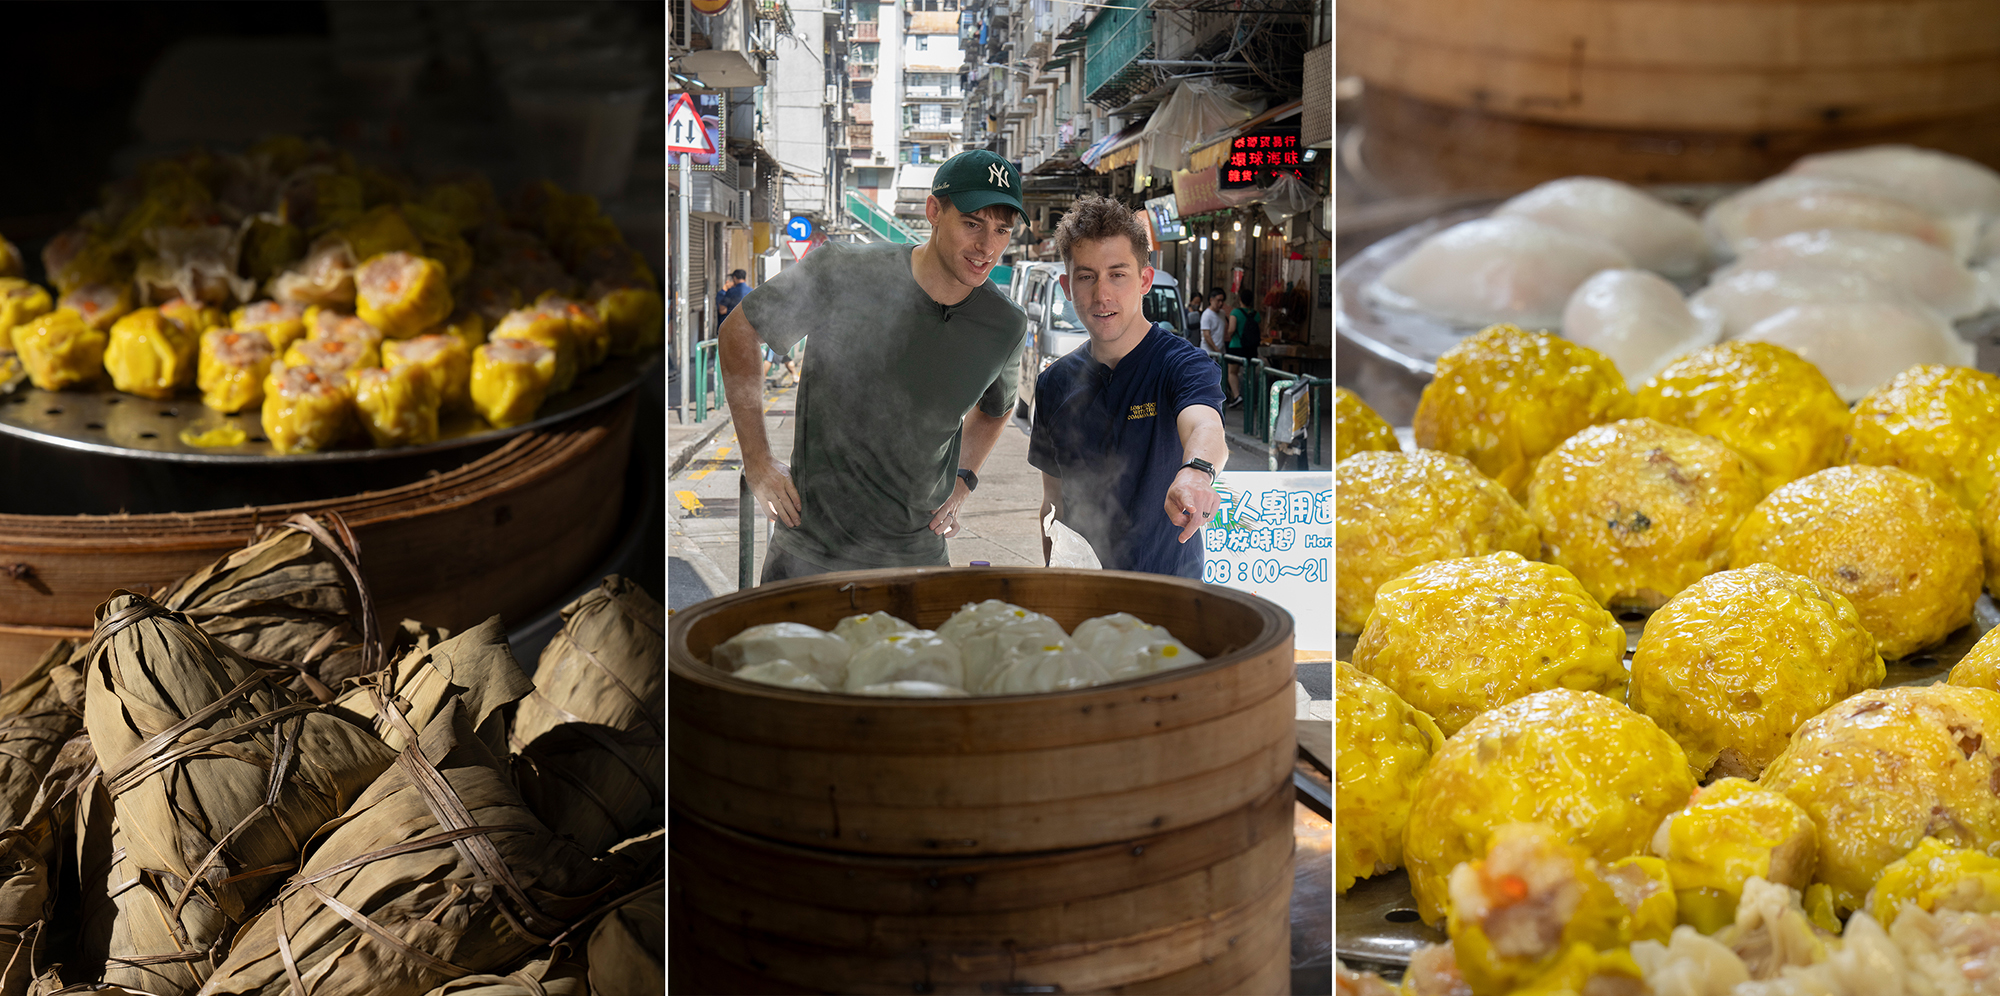 Jolly Tasty: British YouTubers Jolly discover Macao’s Michelin-rated street food